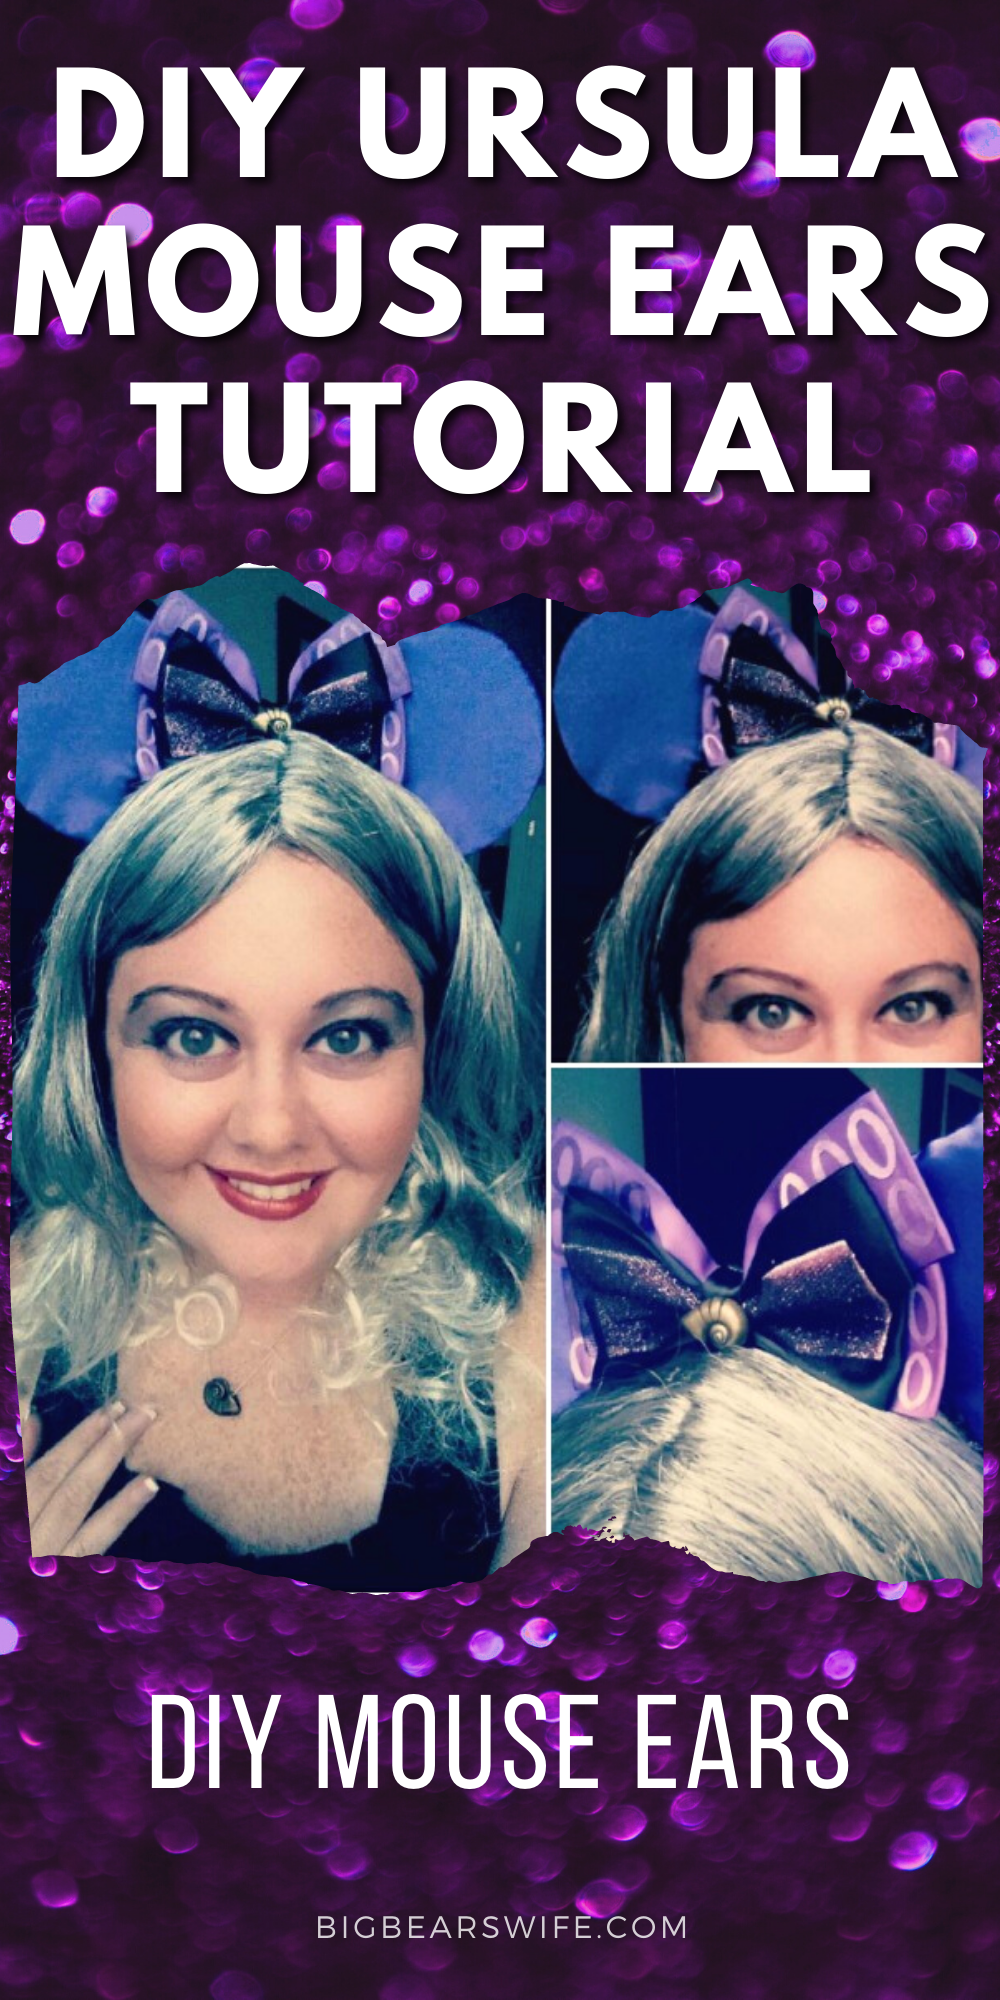  Want to make your very own Ursula Mouse Ears for your trip to Disney? I've got the step by step photo tutorial to show you how it's done! Don't want to make Ursula Mouse Ears? Just follow this tutorial and swap out the fabric and bows for any type of mouse ears! via @bigbearswife